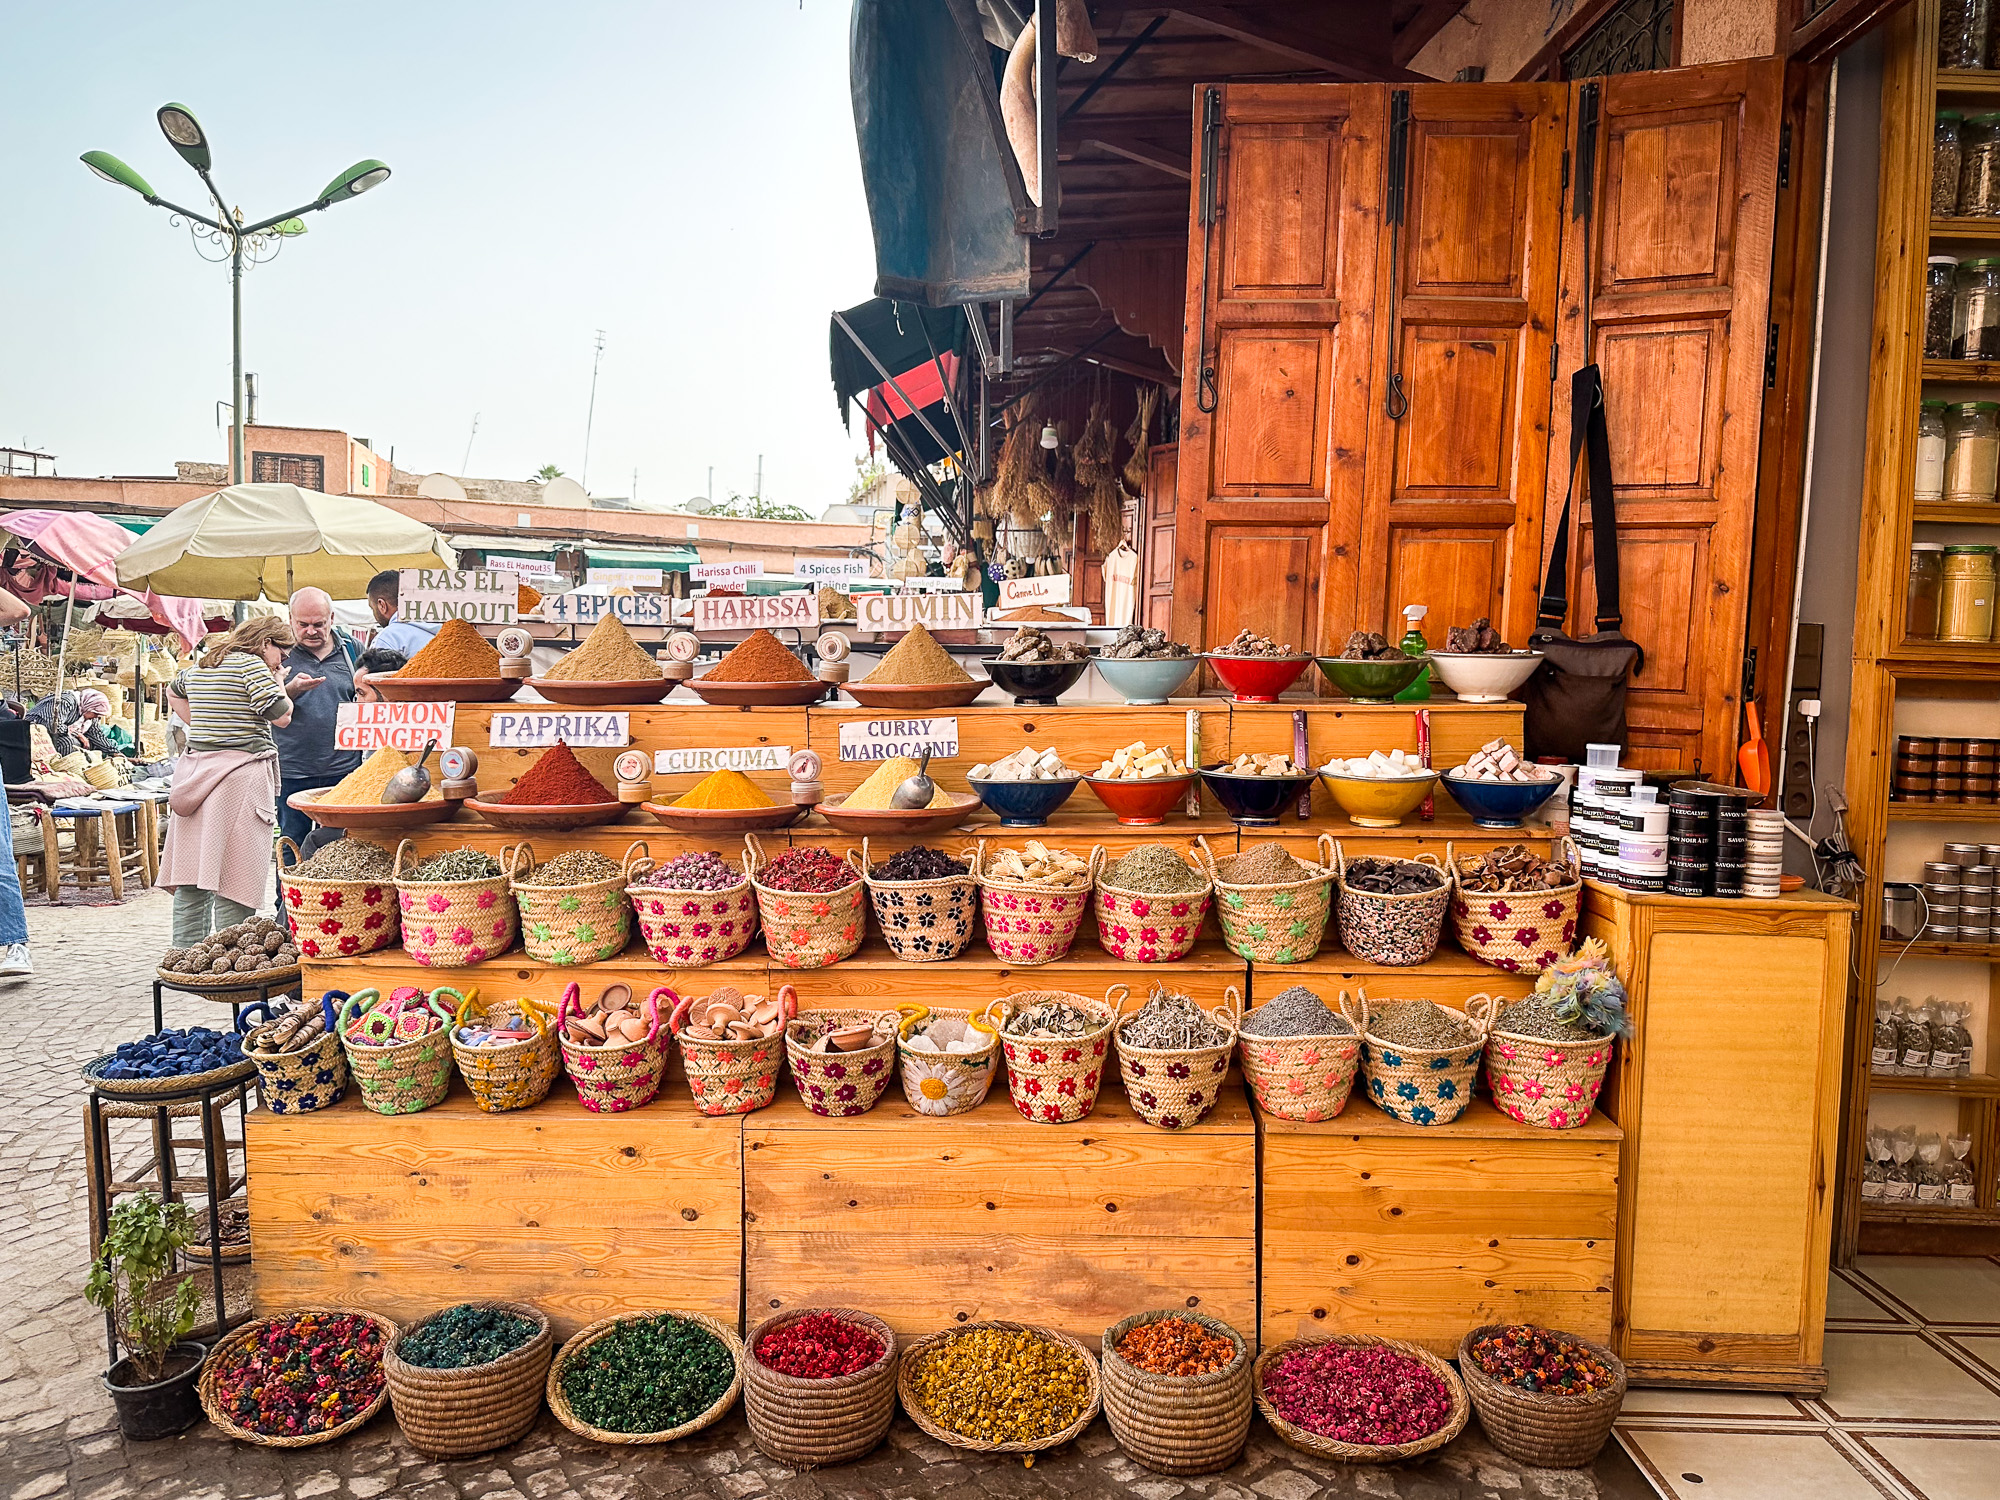 Market stall of spices in Marrakech Medina in the Old Town